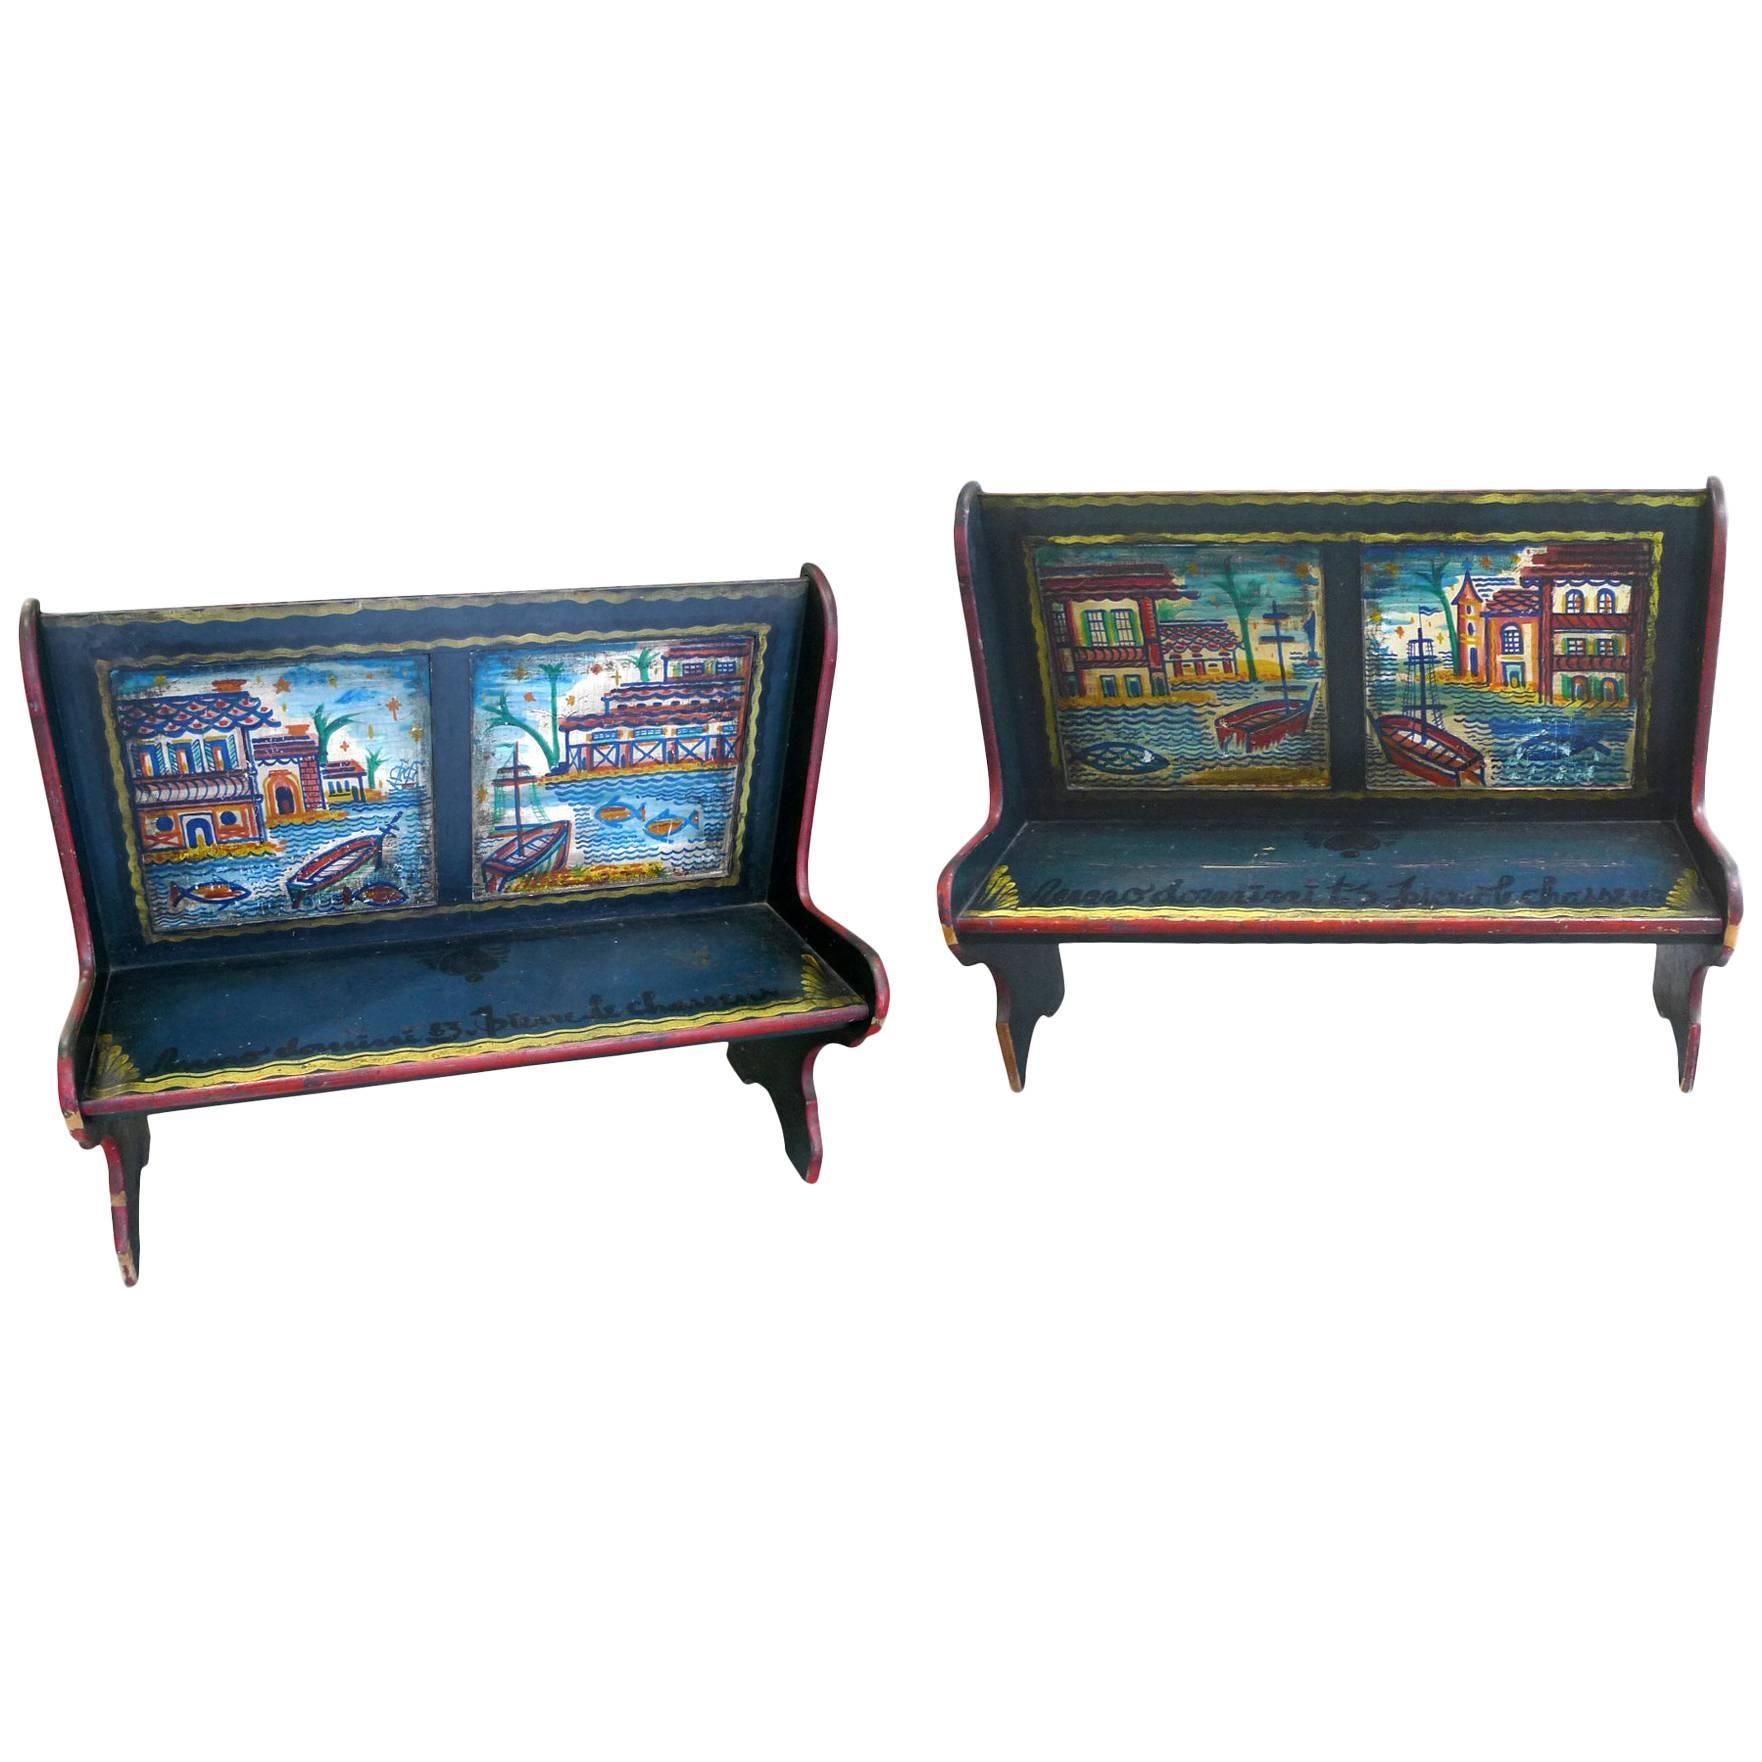 Pair of Peter Hunt Hand-Painted and Signed Benches